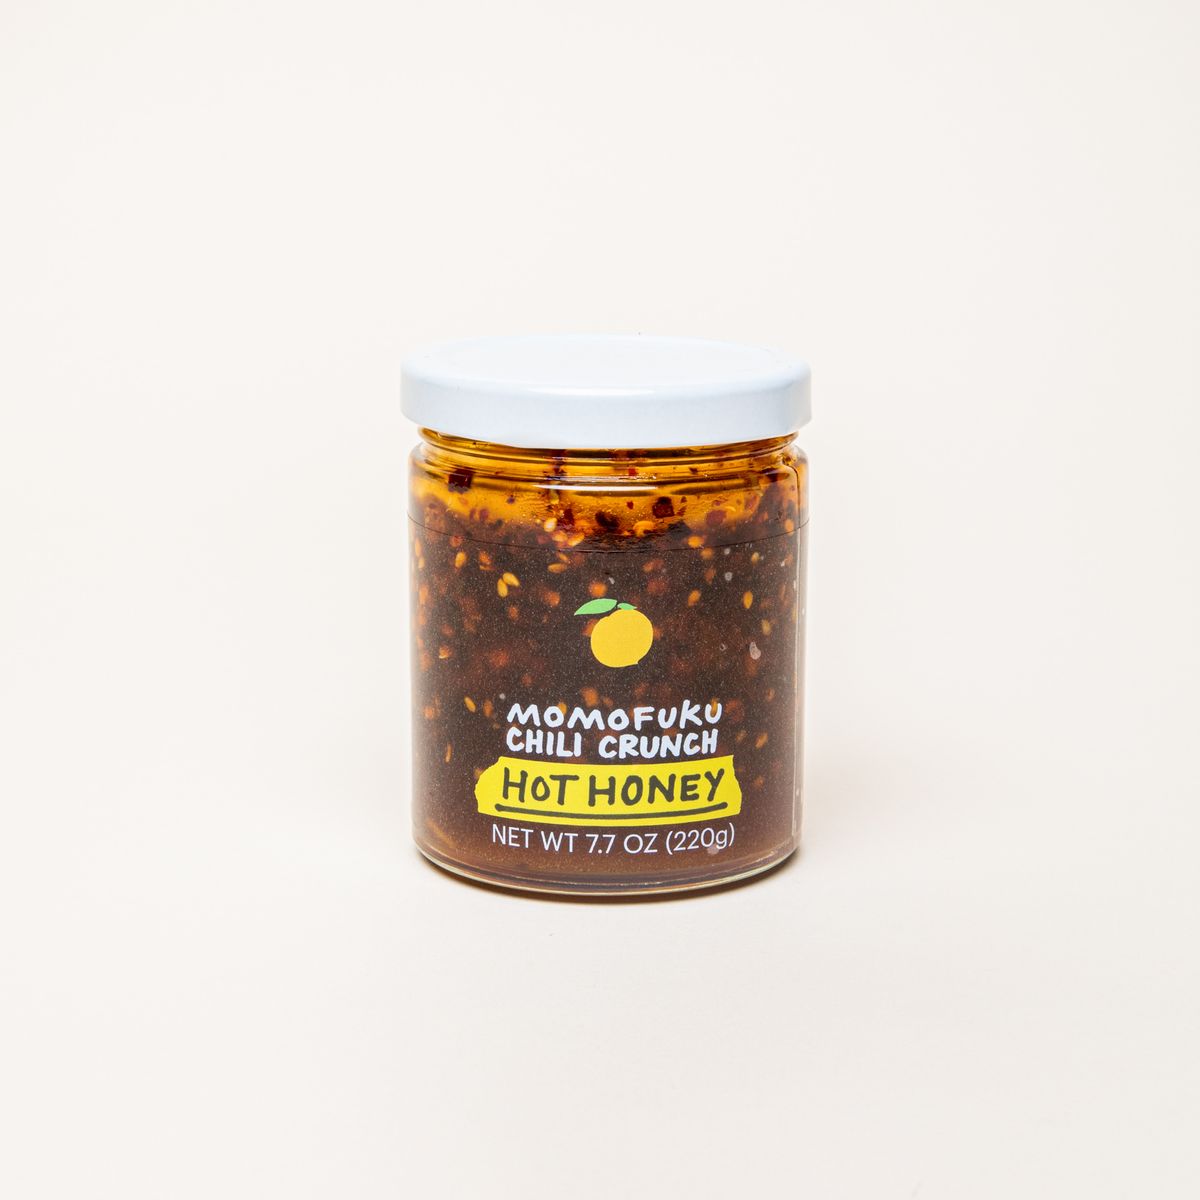 A clear jar with a white top that is filled with a warm brown honey with chili flakes and a label that reads, "Momofuku Chili Crunch Hot Honey"